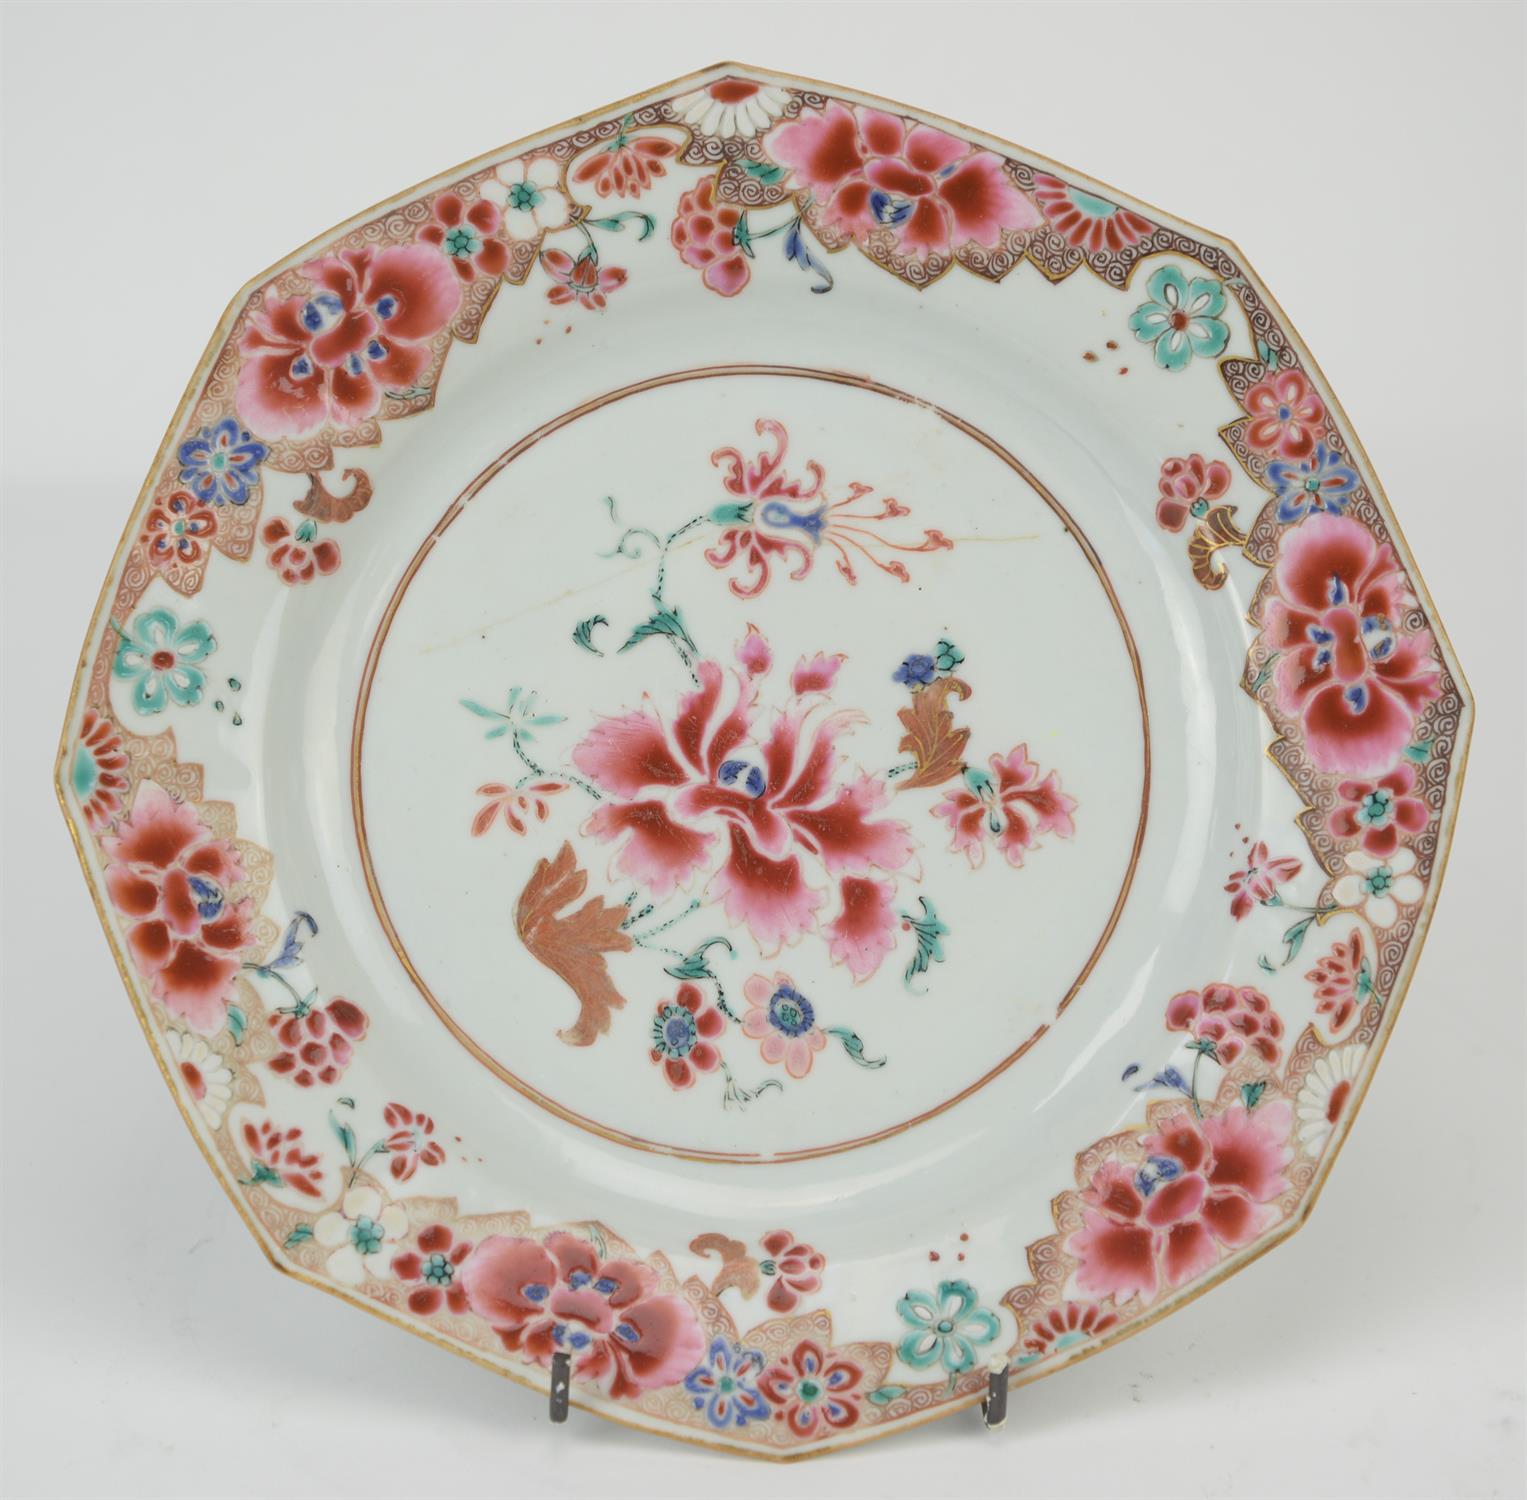 Eight famille rose dishes; each one decorated with floral designs and about 22.5 cm diameter - Image 6 of 14